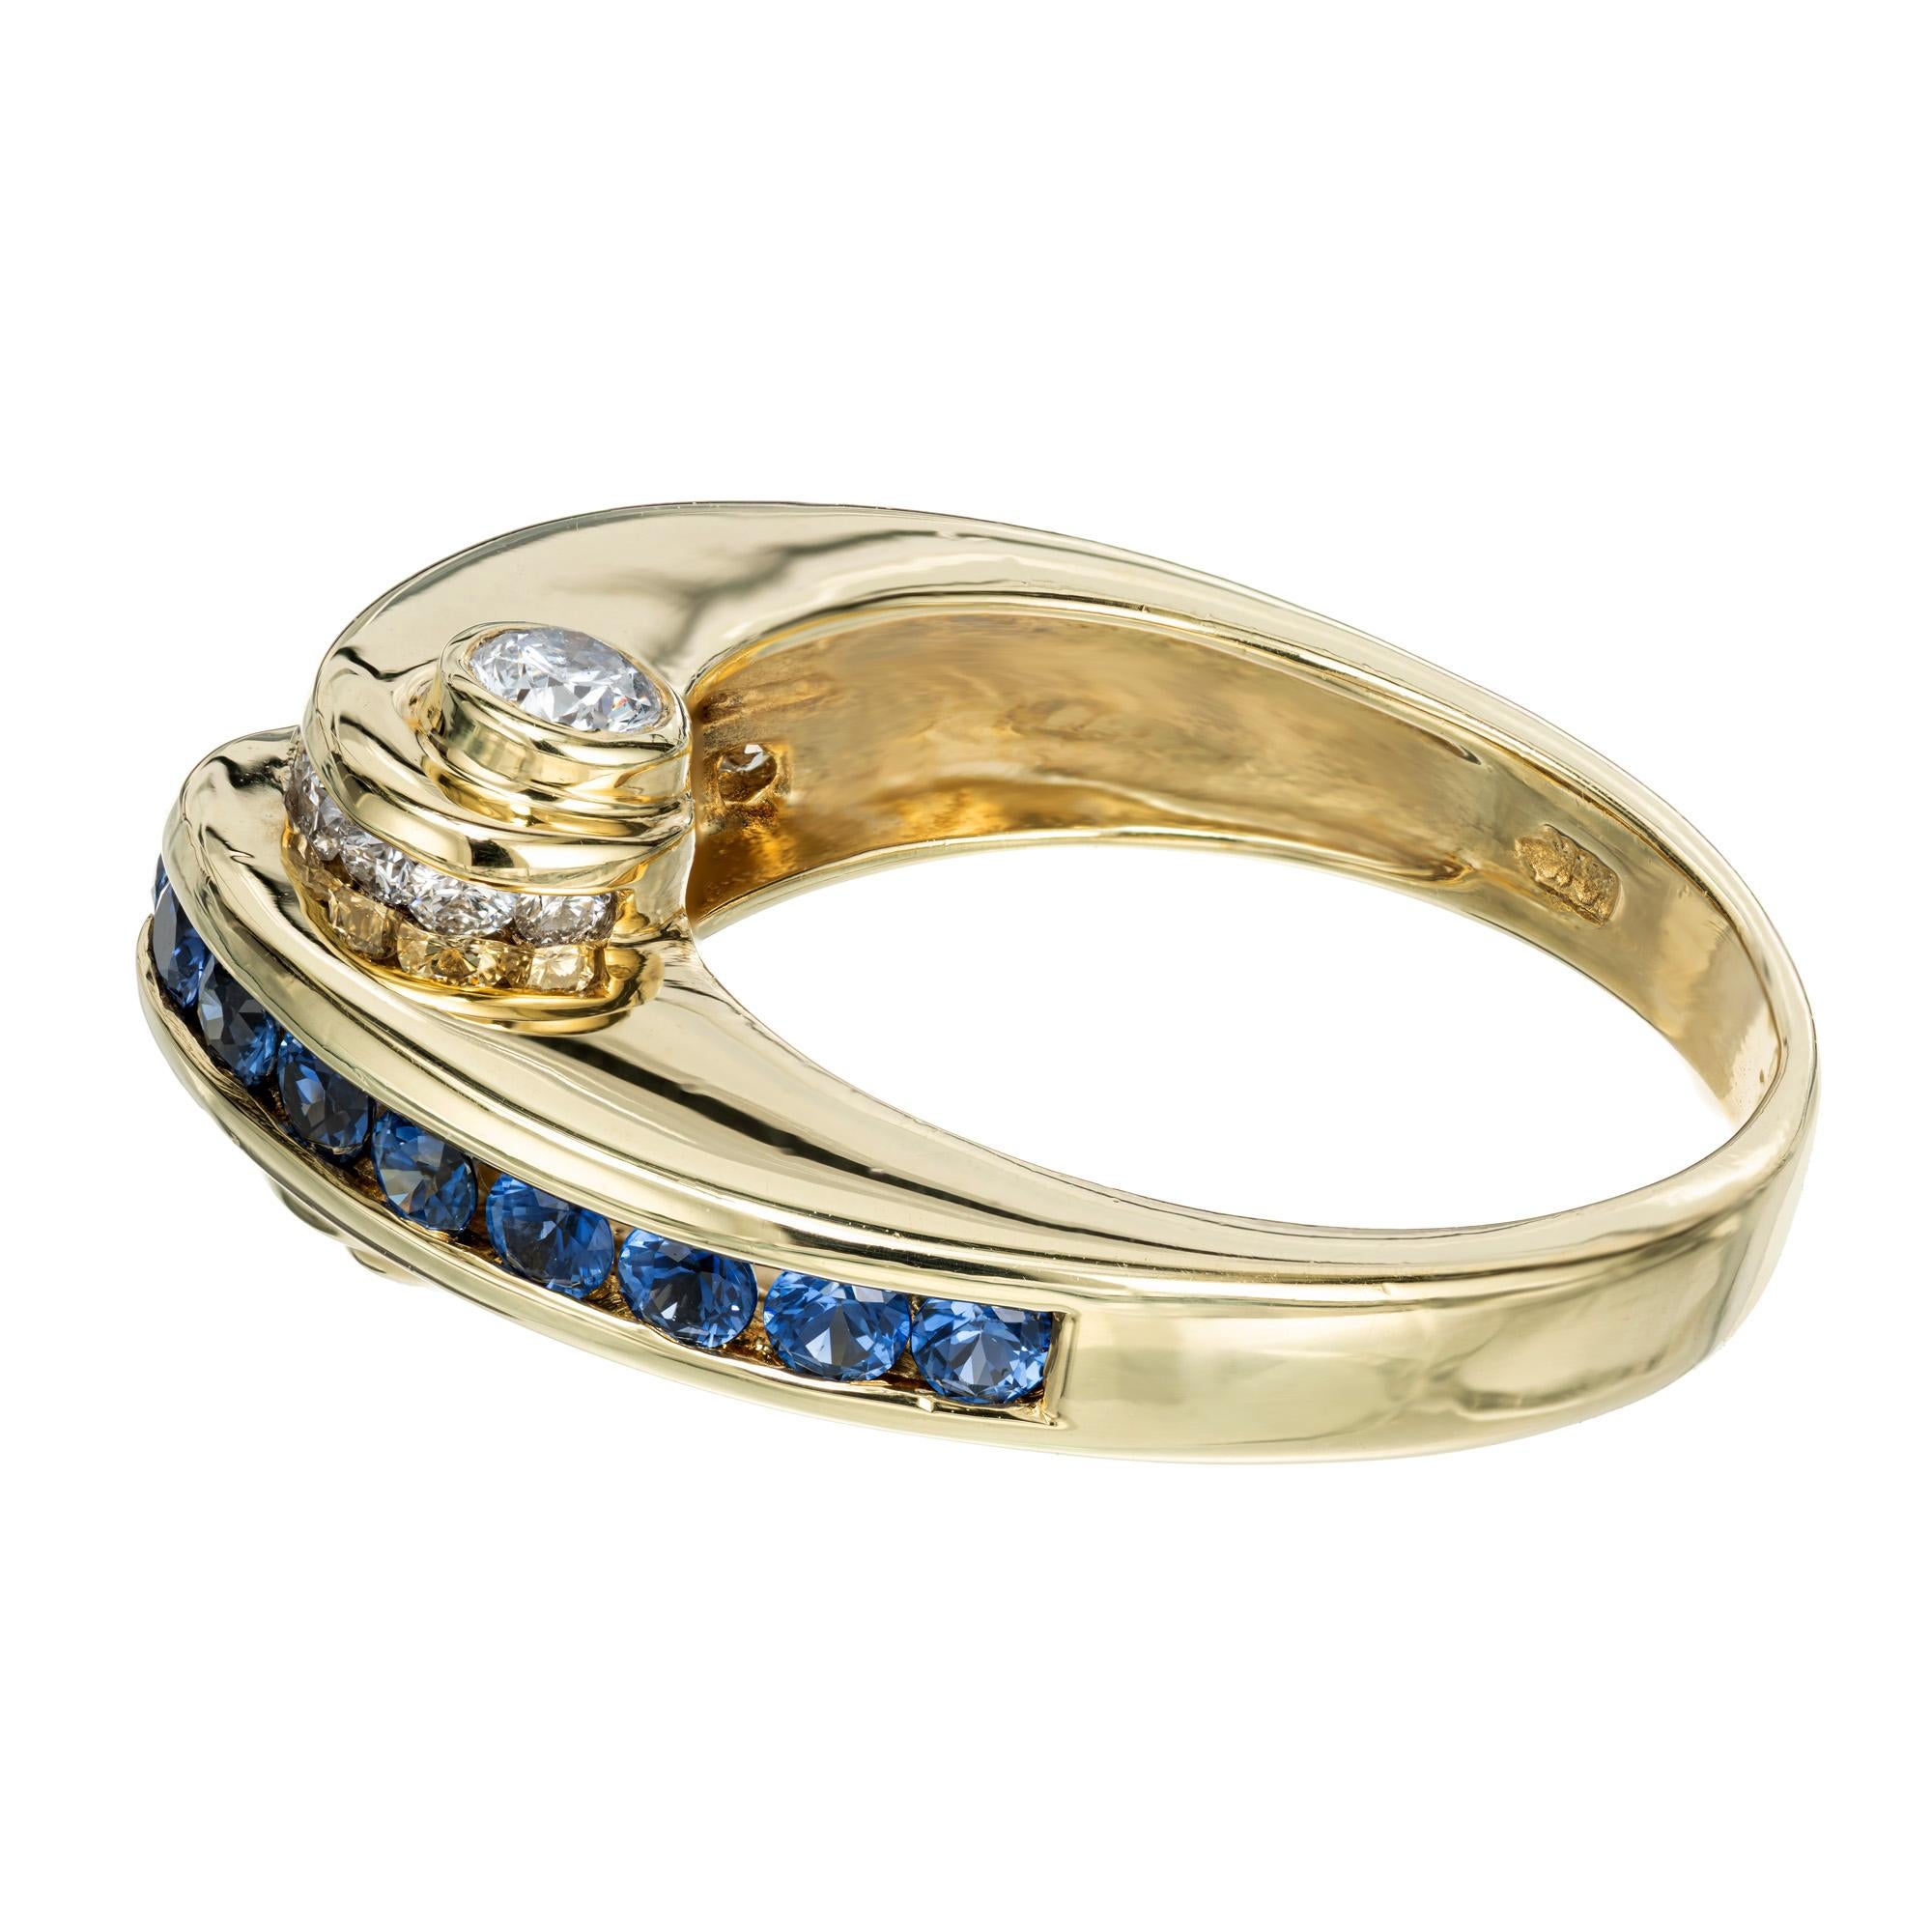 Charles Krypell .75 Carat Blue Sapphire Diamond Gold Curved Band Ring In Good Condition For Sale In Stamford, CT